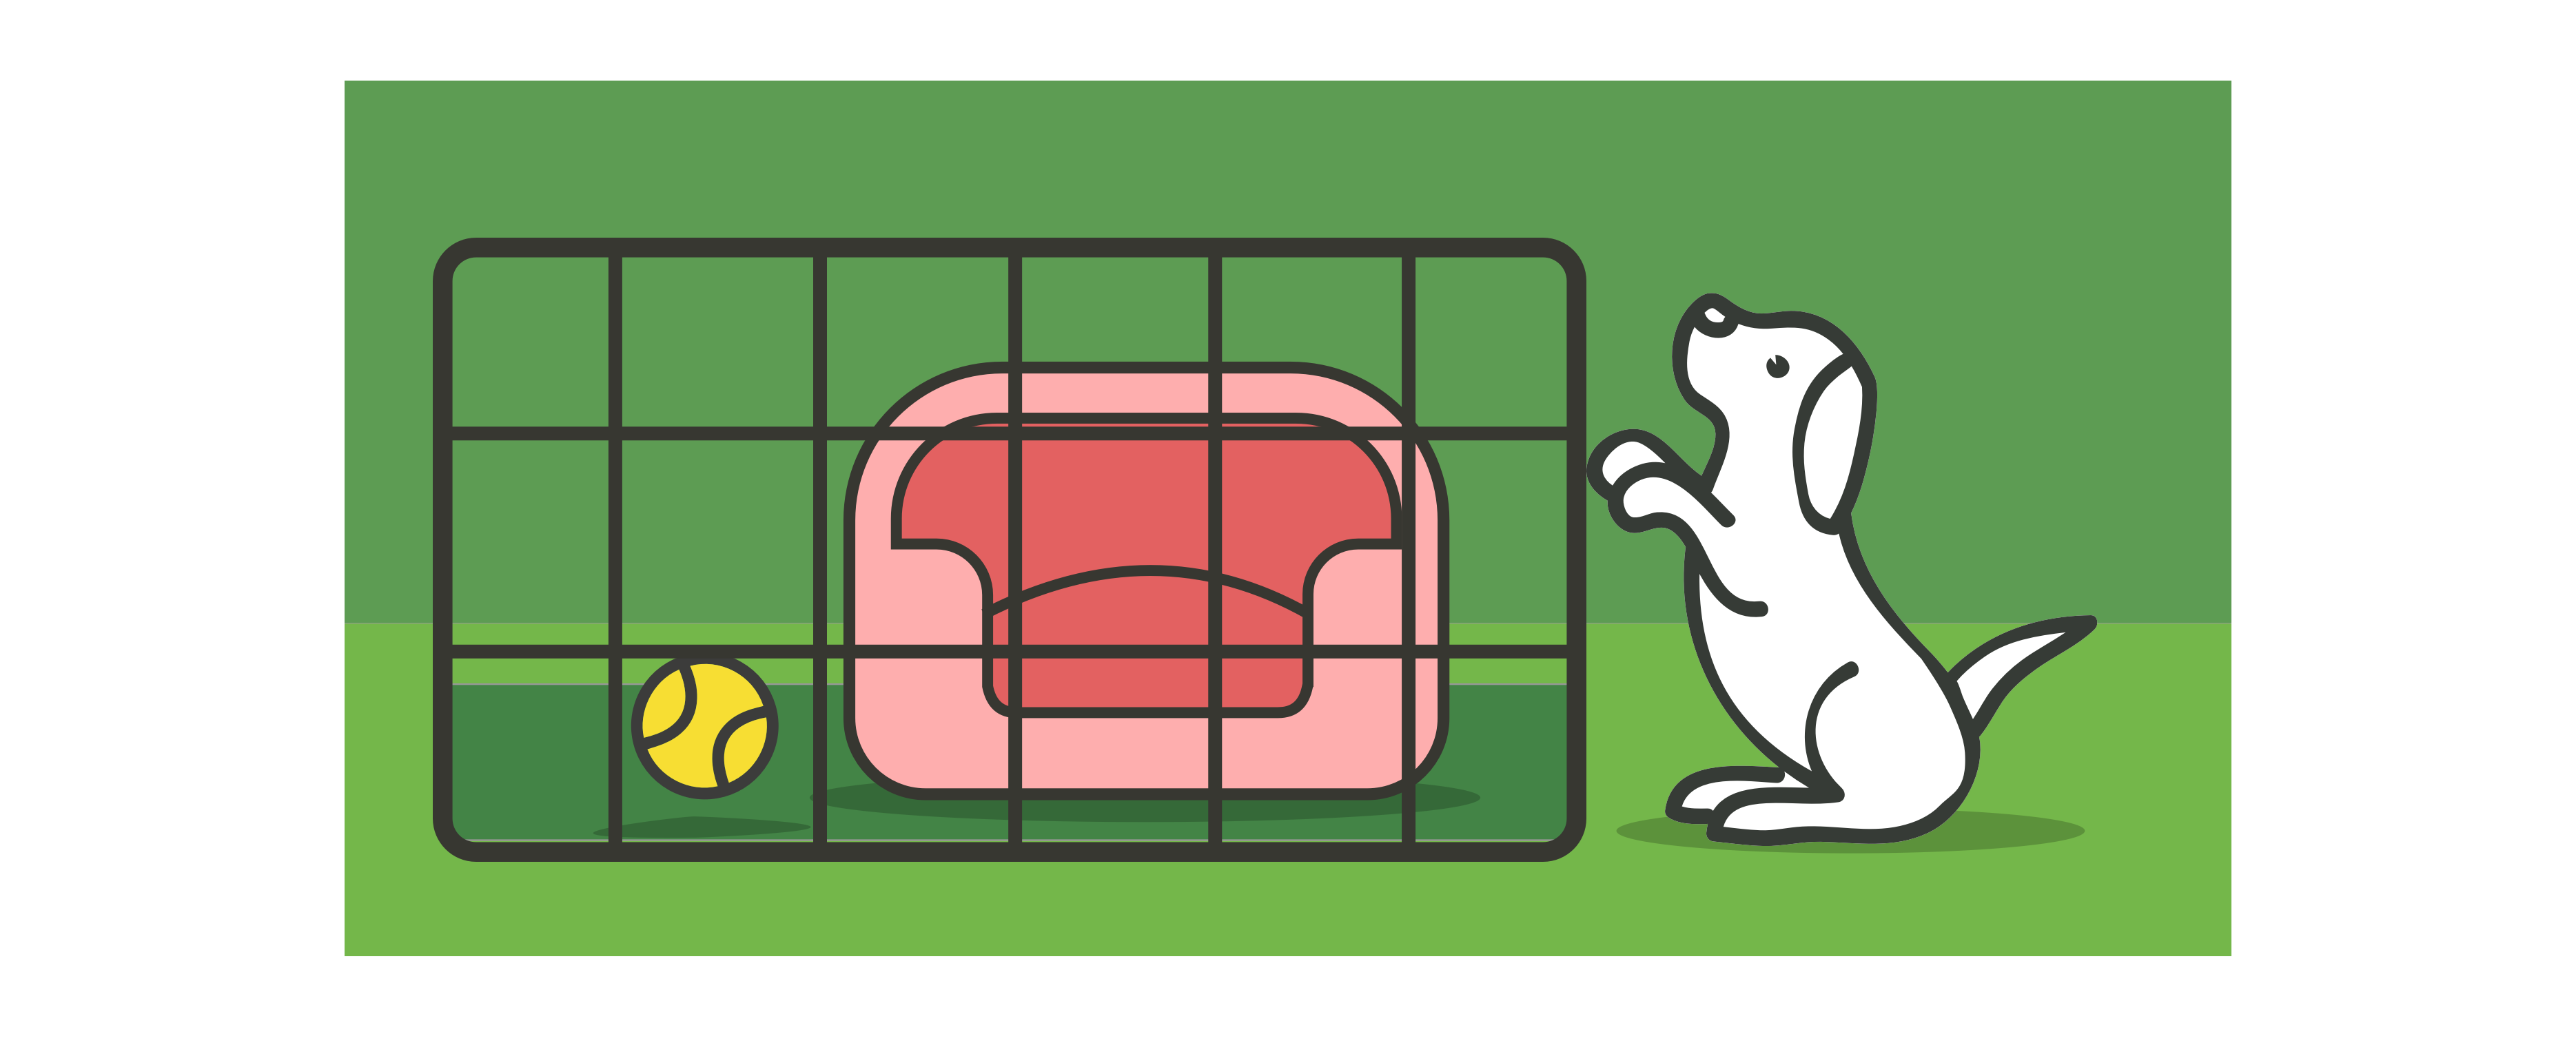 Illustration of a dog crate containing bedding and dog toy